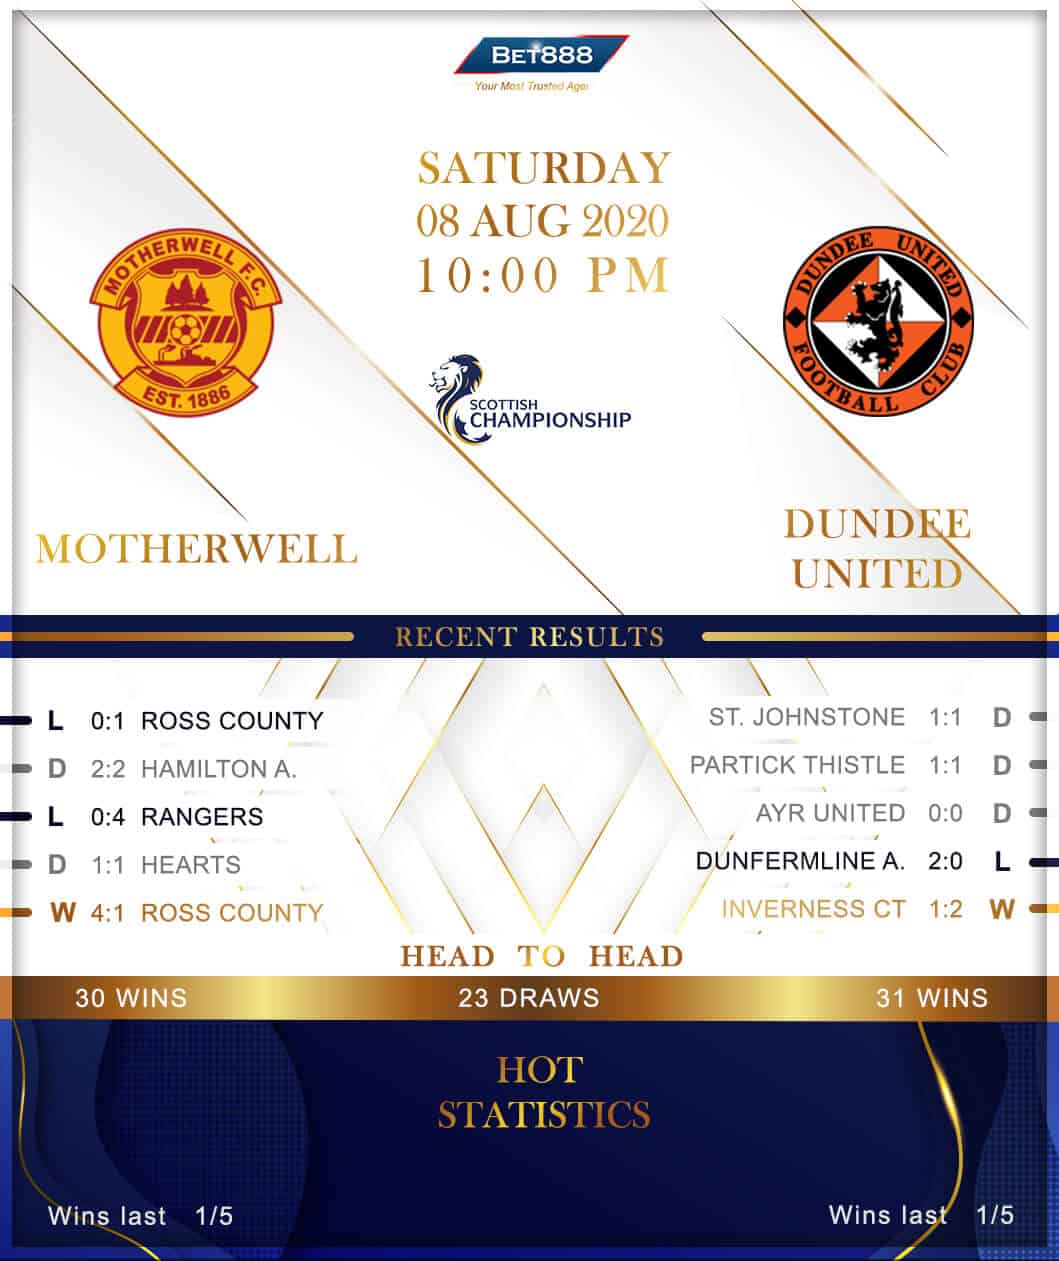 Motherwell vs  Dundee United 08/08/20